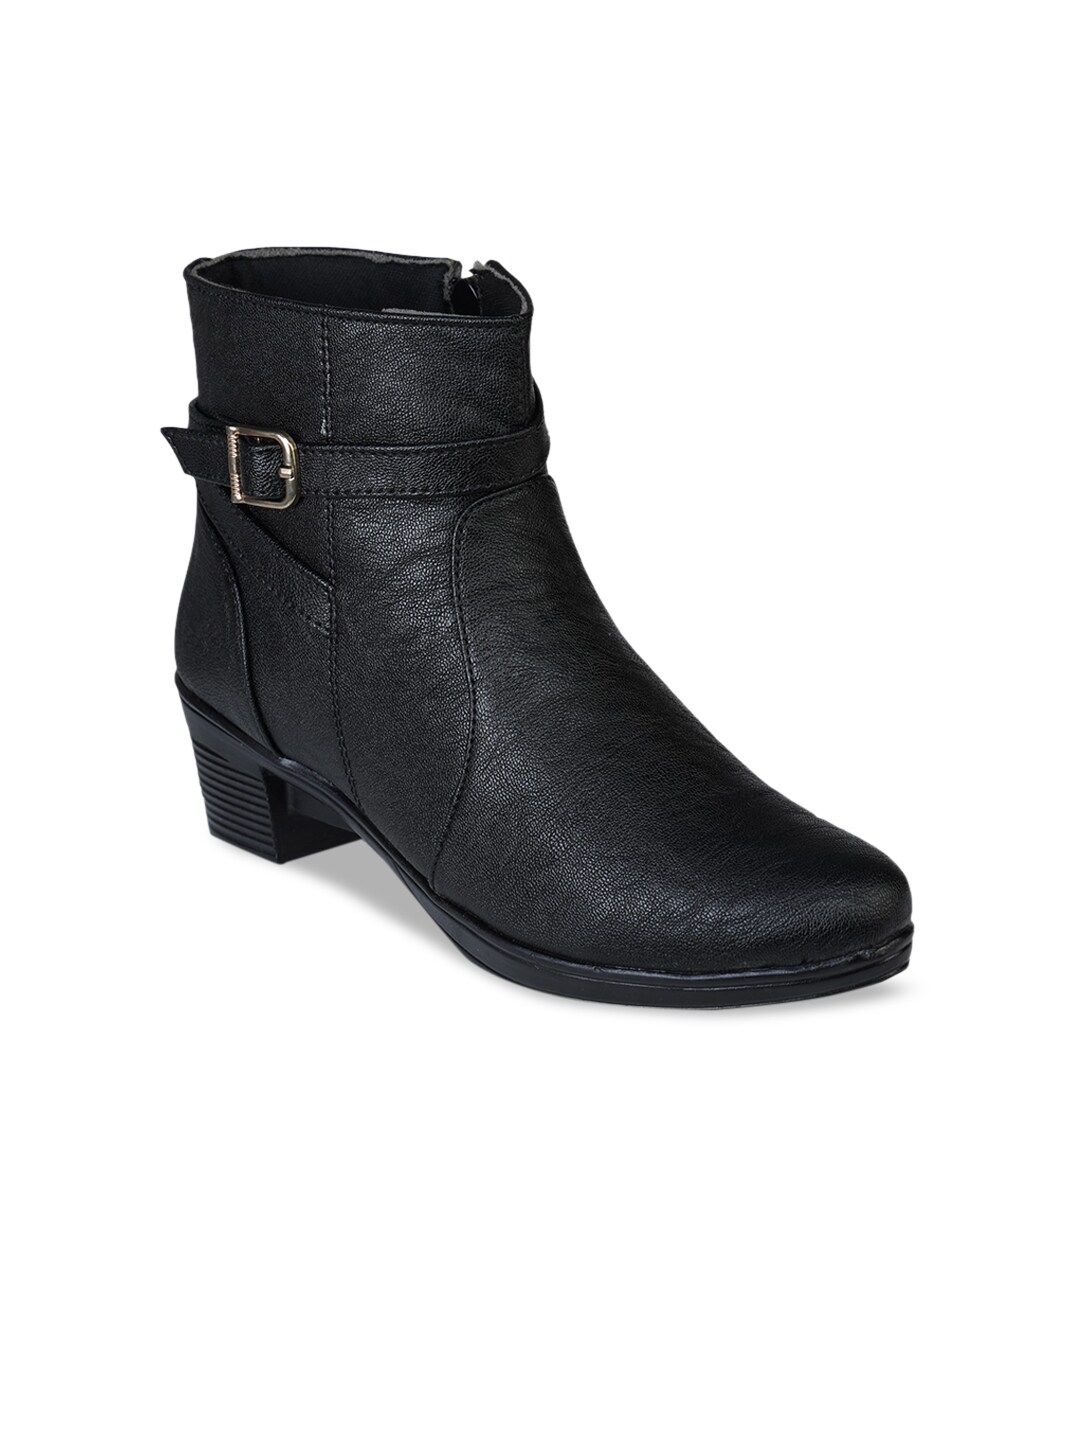 TRASE Women Black Textured Heeled Boots Price in India